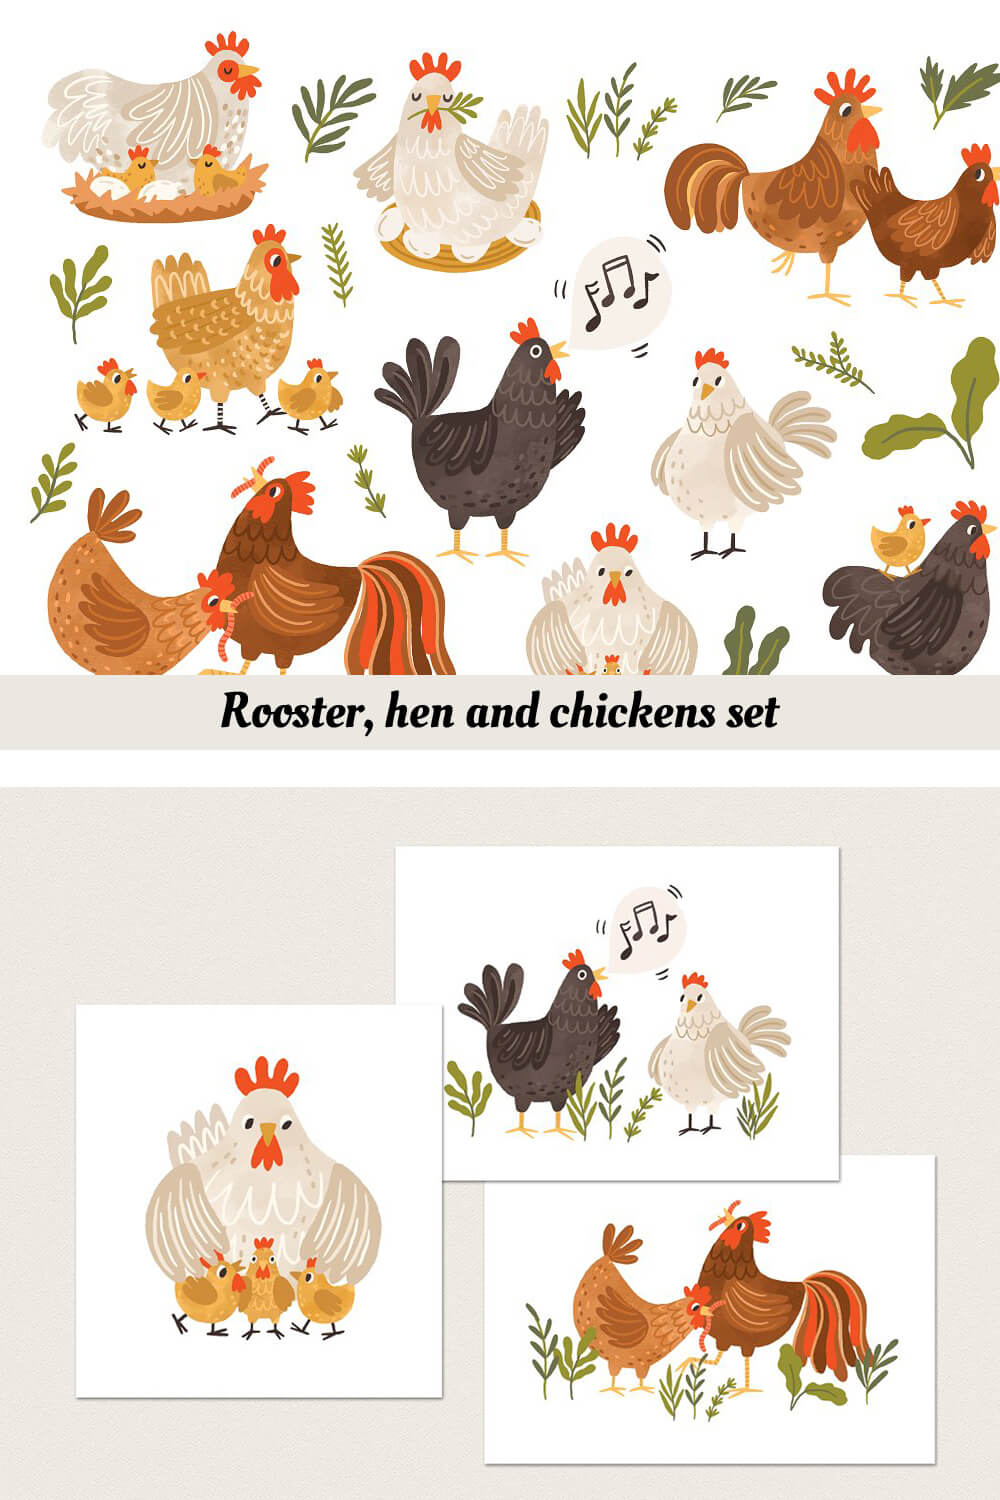 Two slides with images of roosters, hens and chickens.